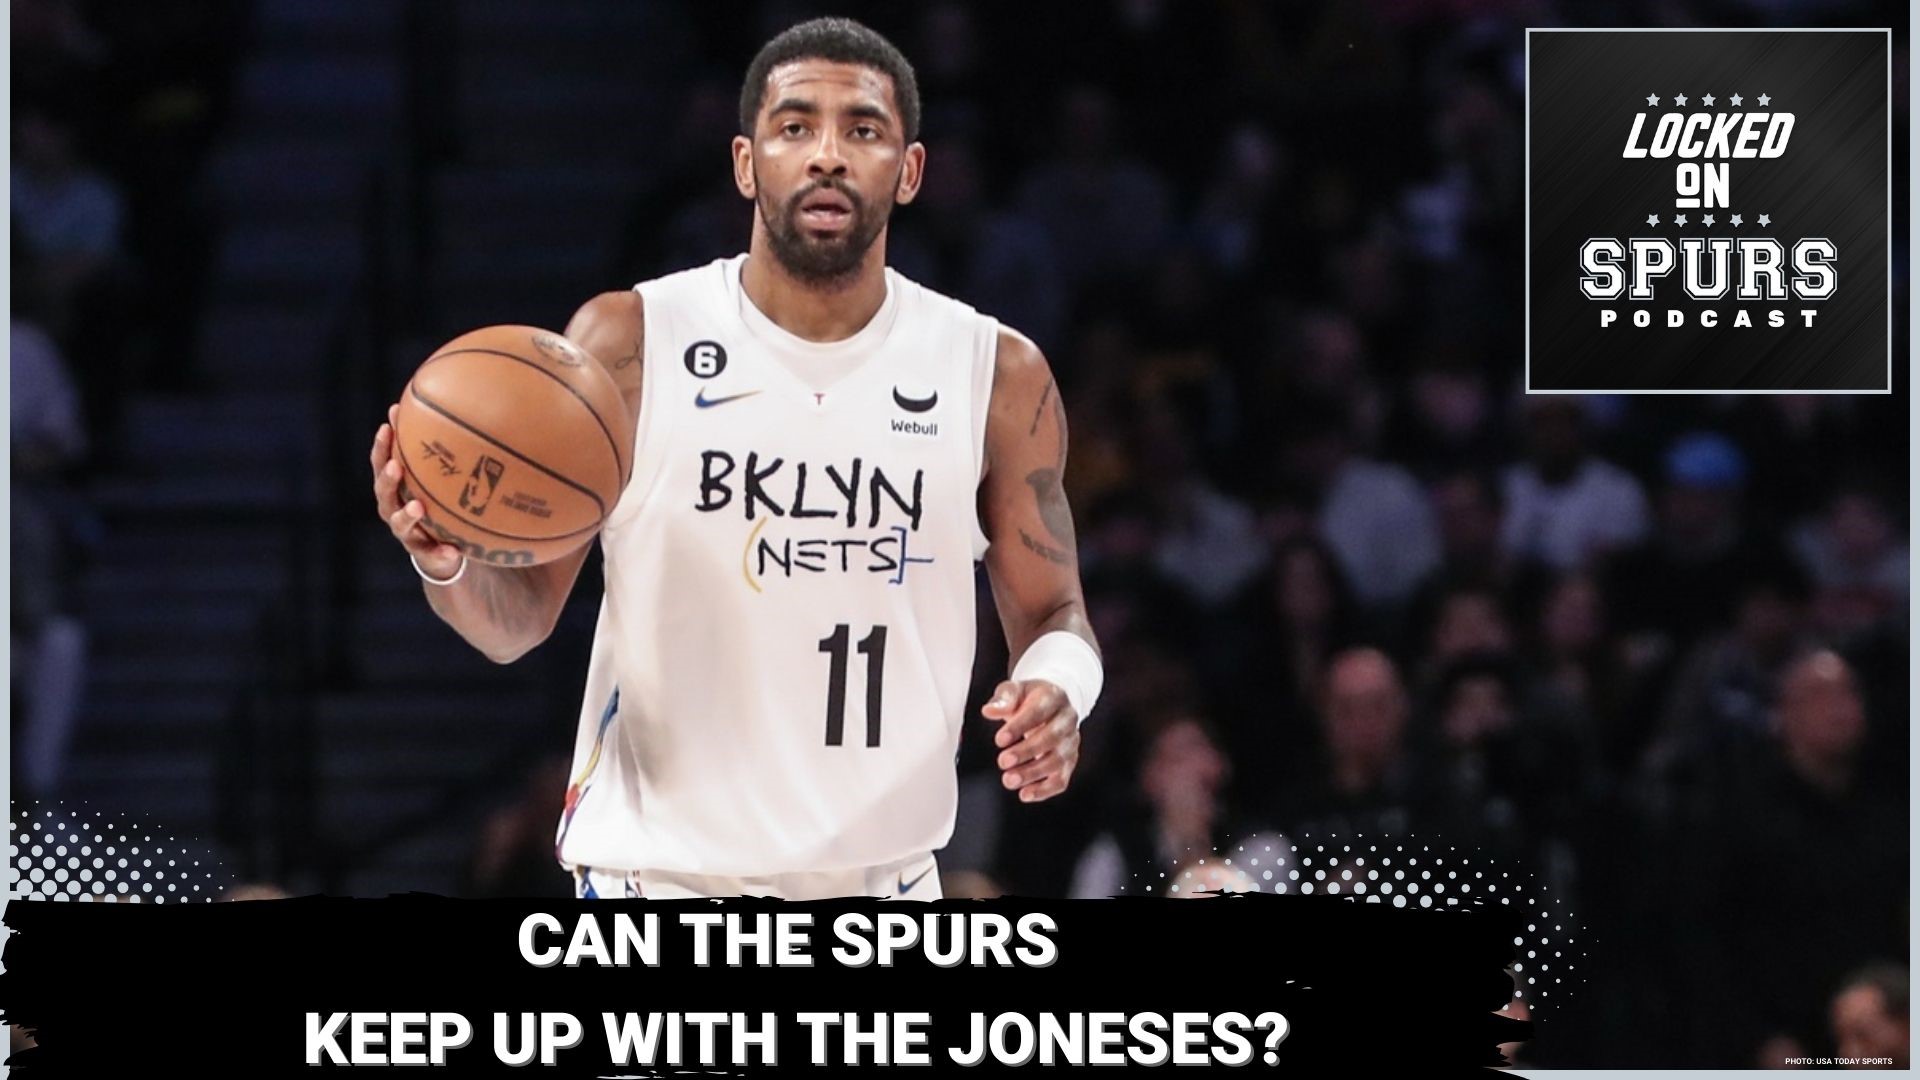 West teams have gotten stronger. Can the Spurs make moves to keep up with the top NBA teams?